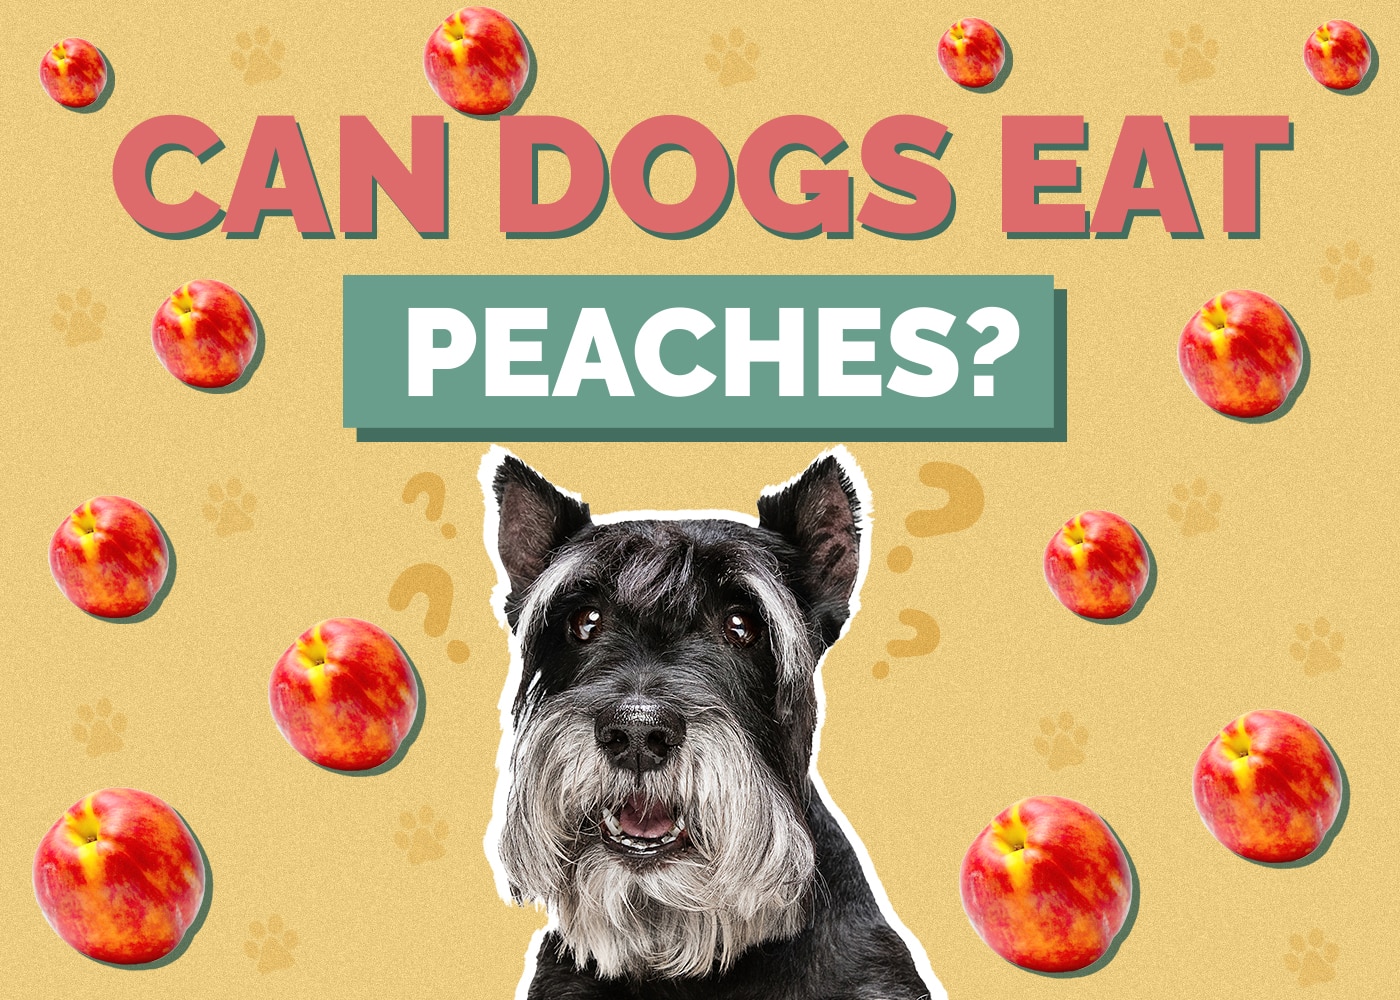 Can Dogs Eat peaches